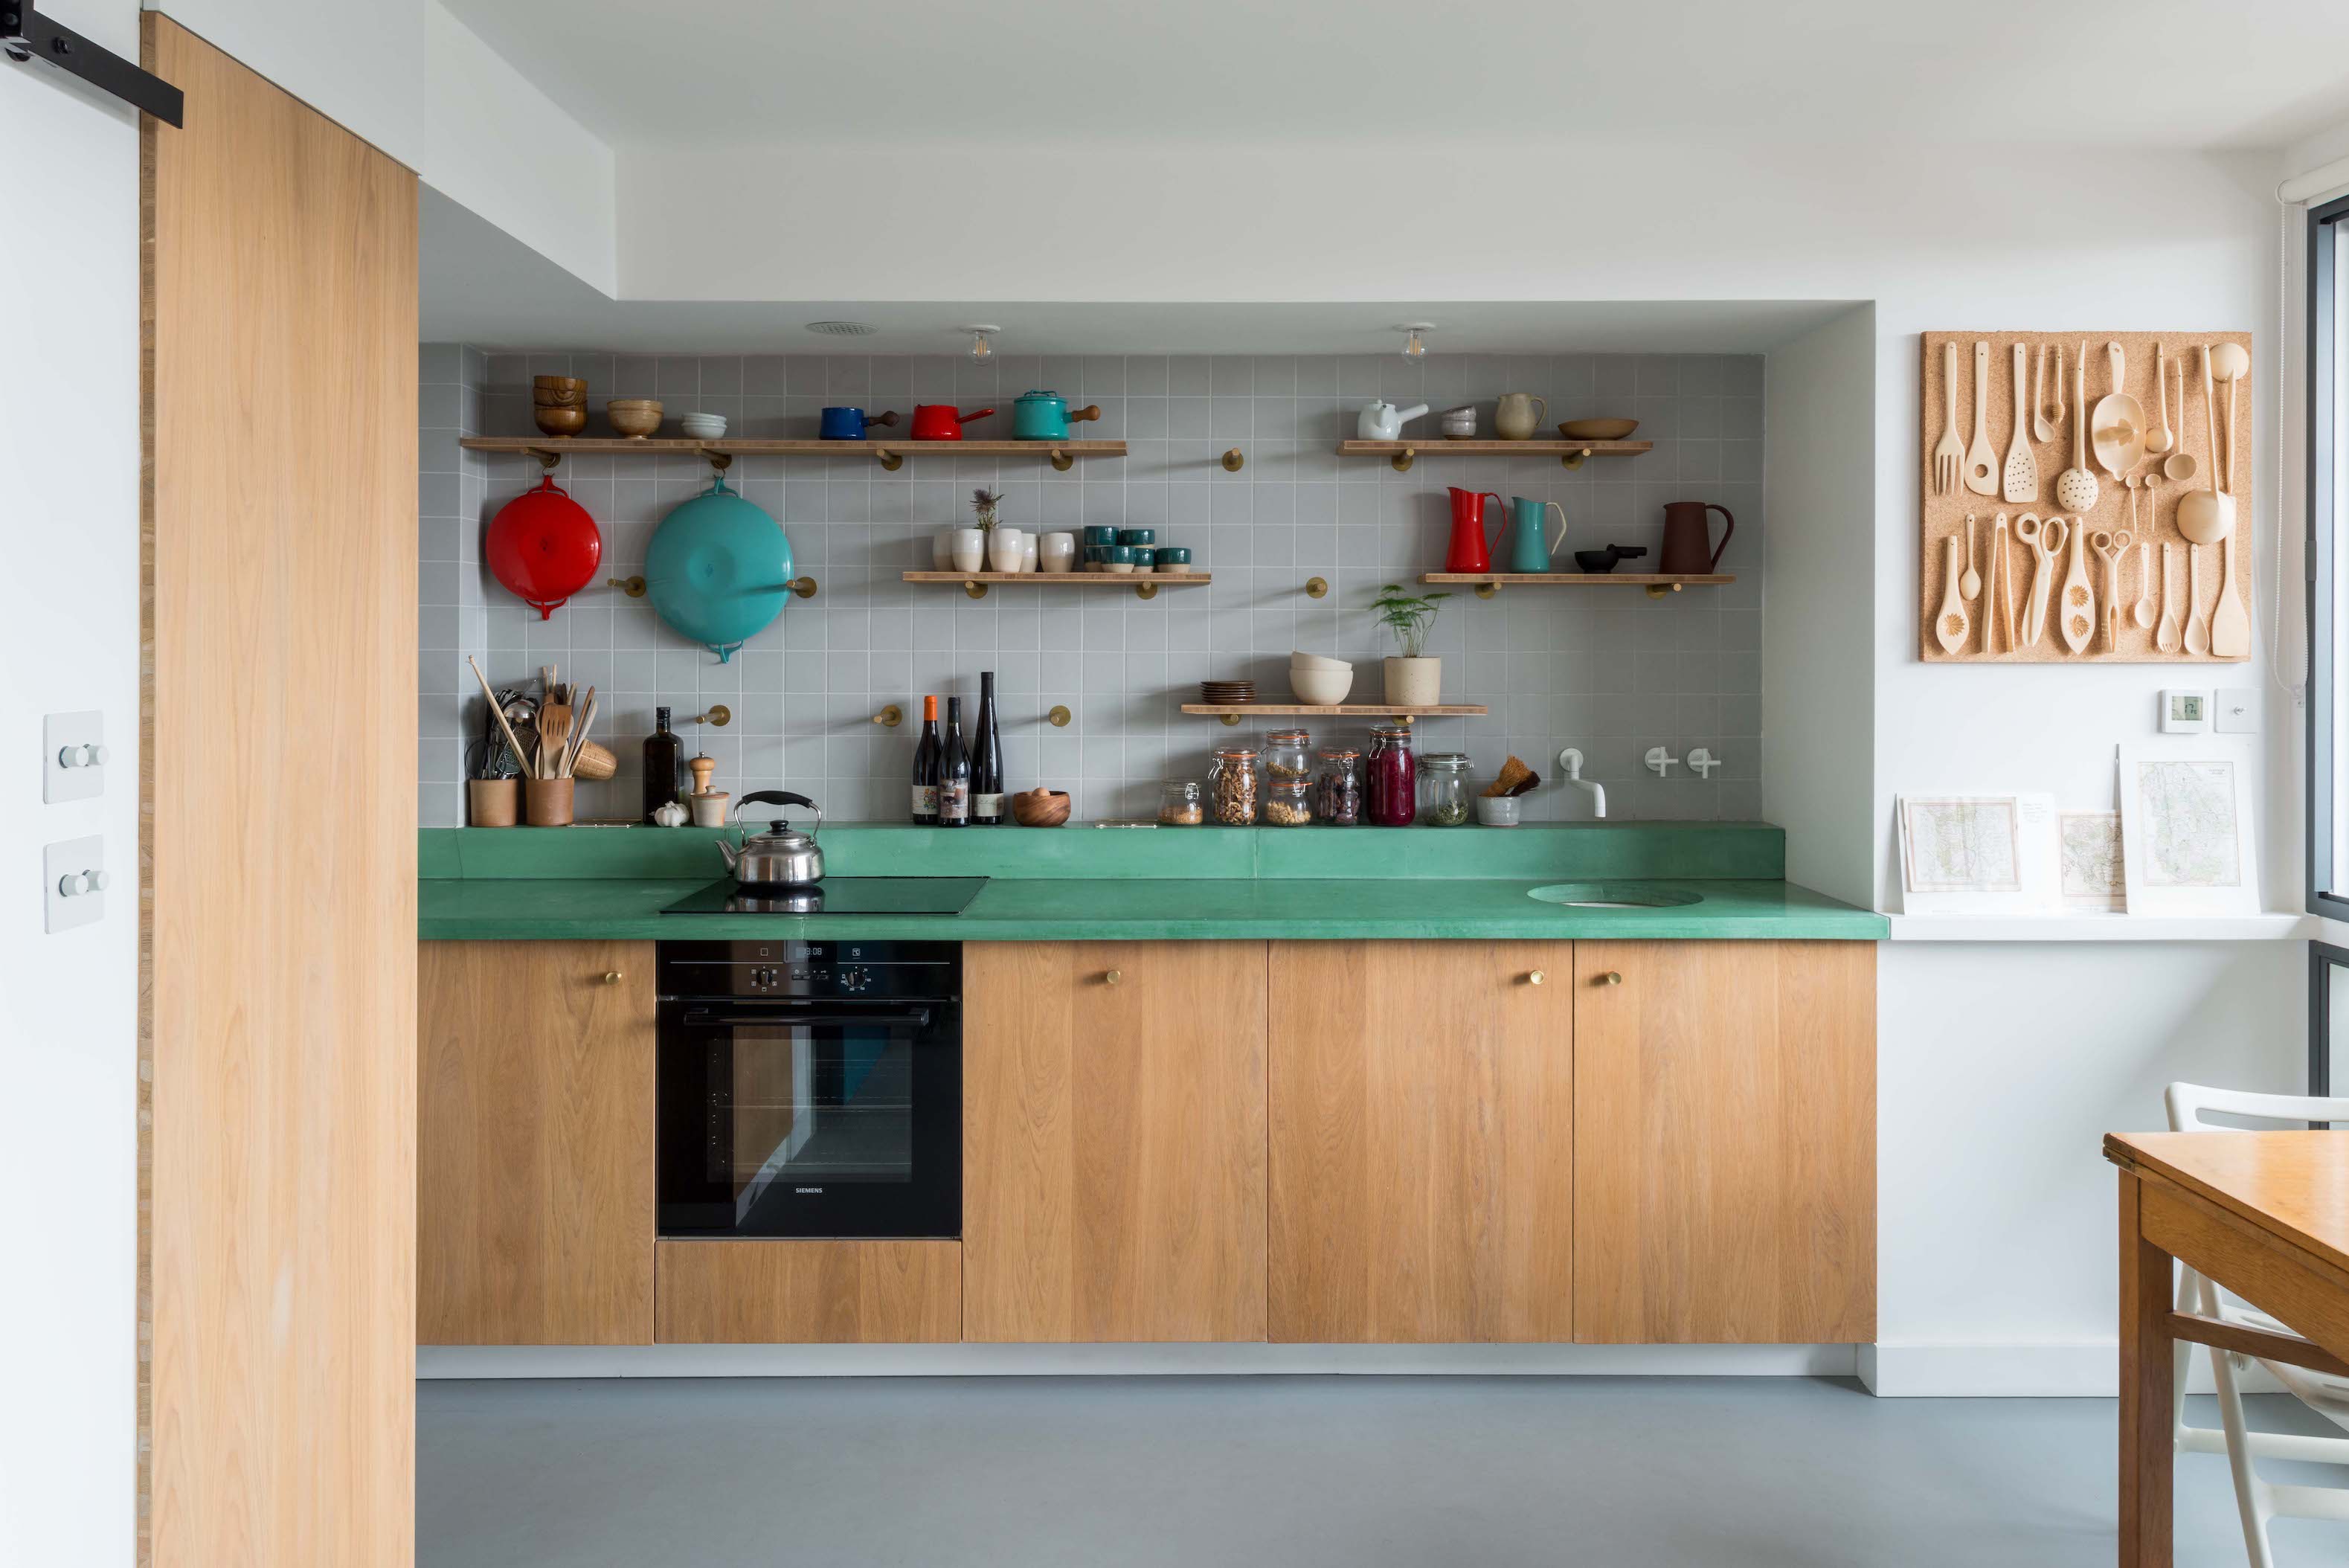 the kitchen is designed with cabinets in oak triply, a three layered plywood, a 9